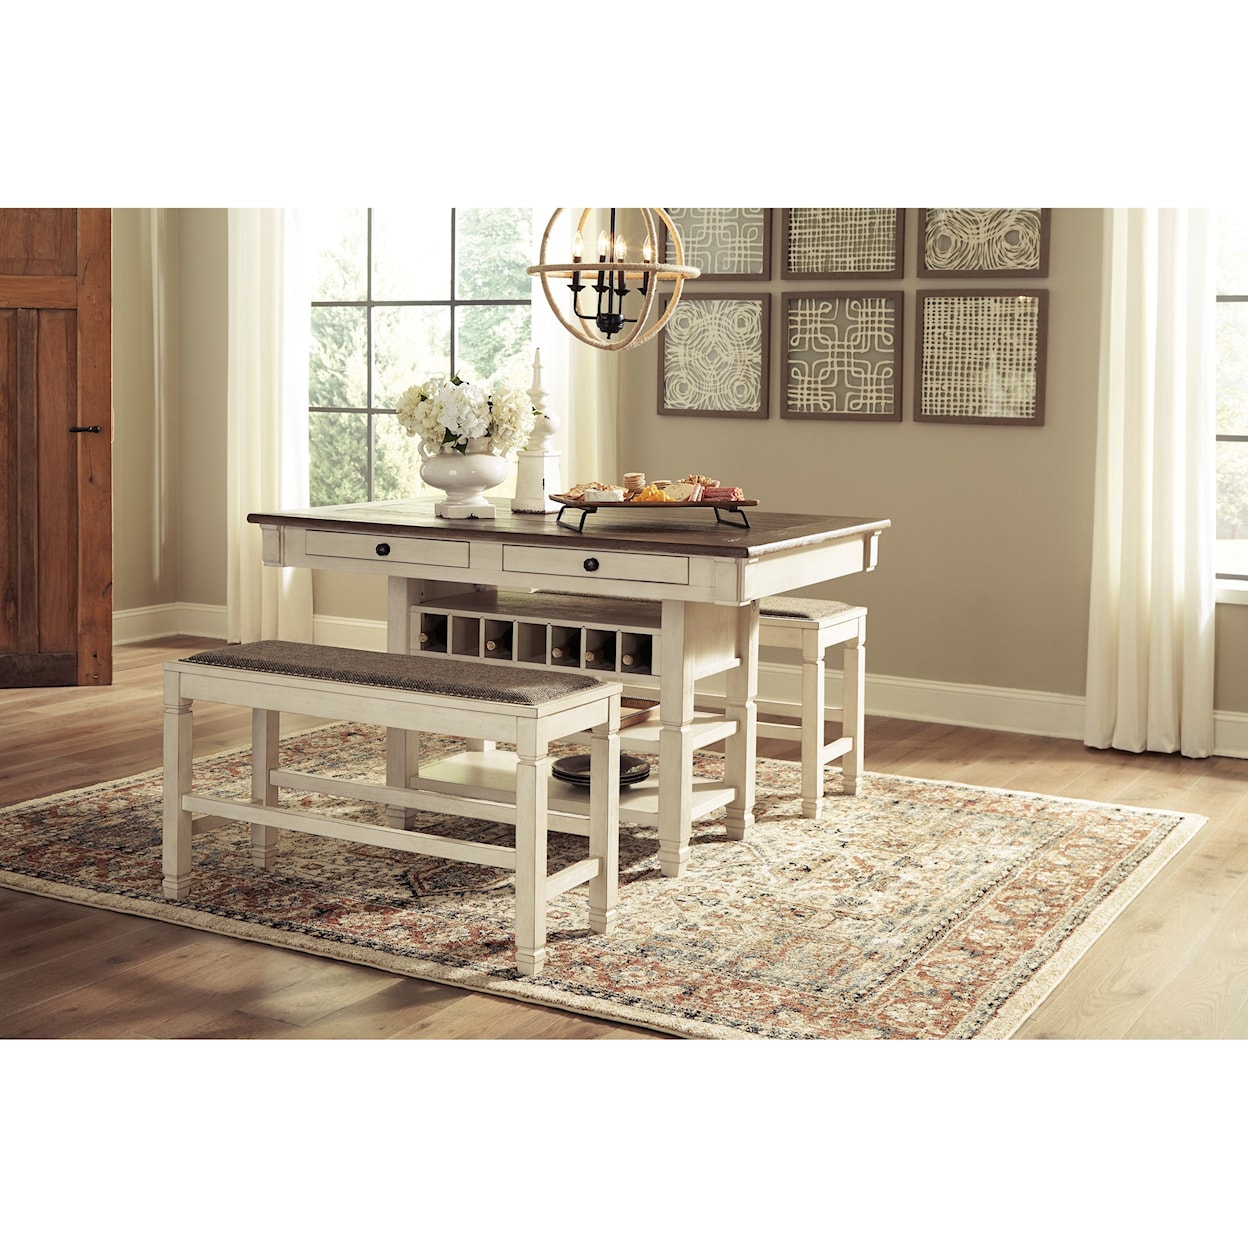 Signature Design by Ashley Bolanburg 3pc Dining Room Group